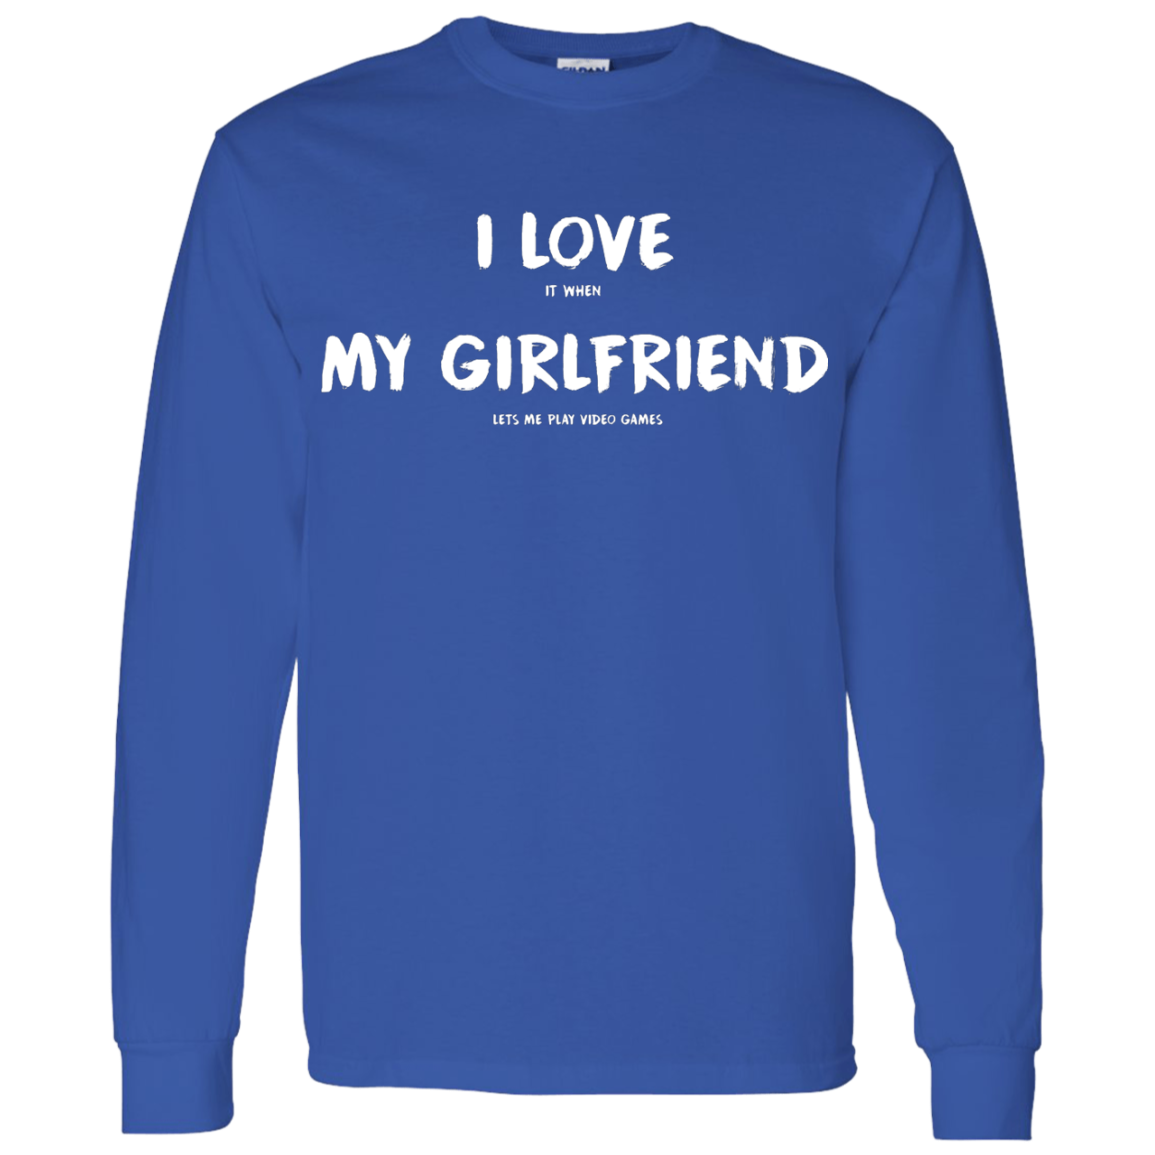 I Love It When My Girlfriend Lets Me Play Video Games - Video Gaming Shirt